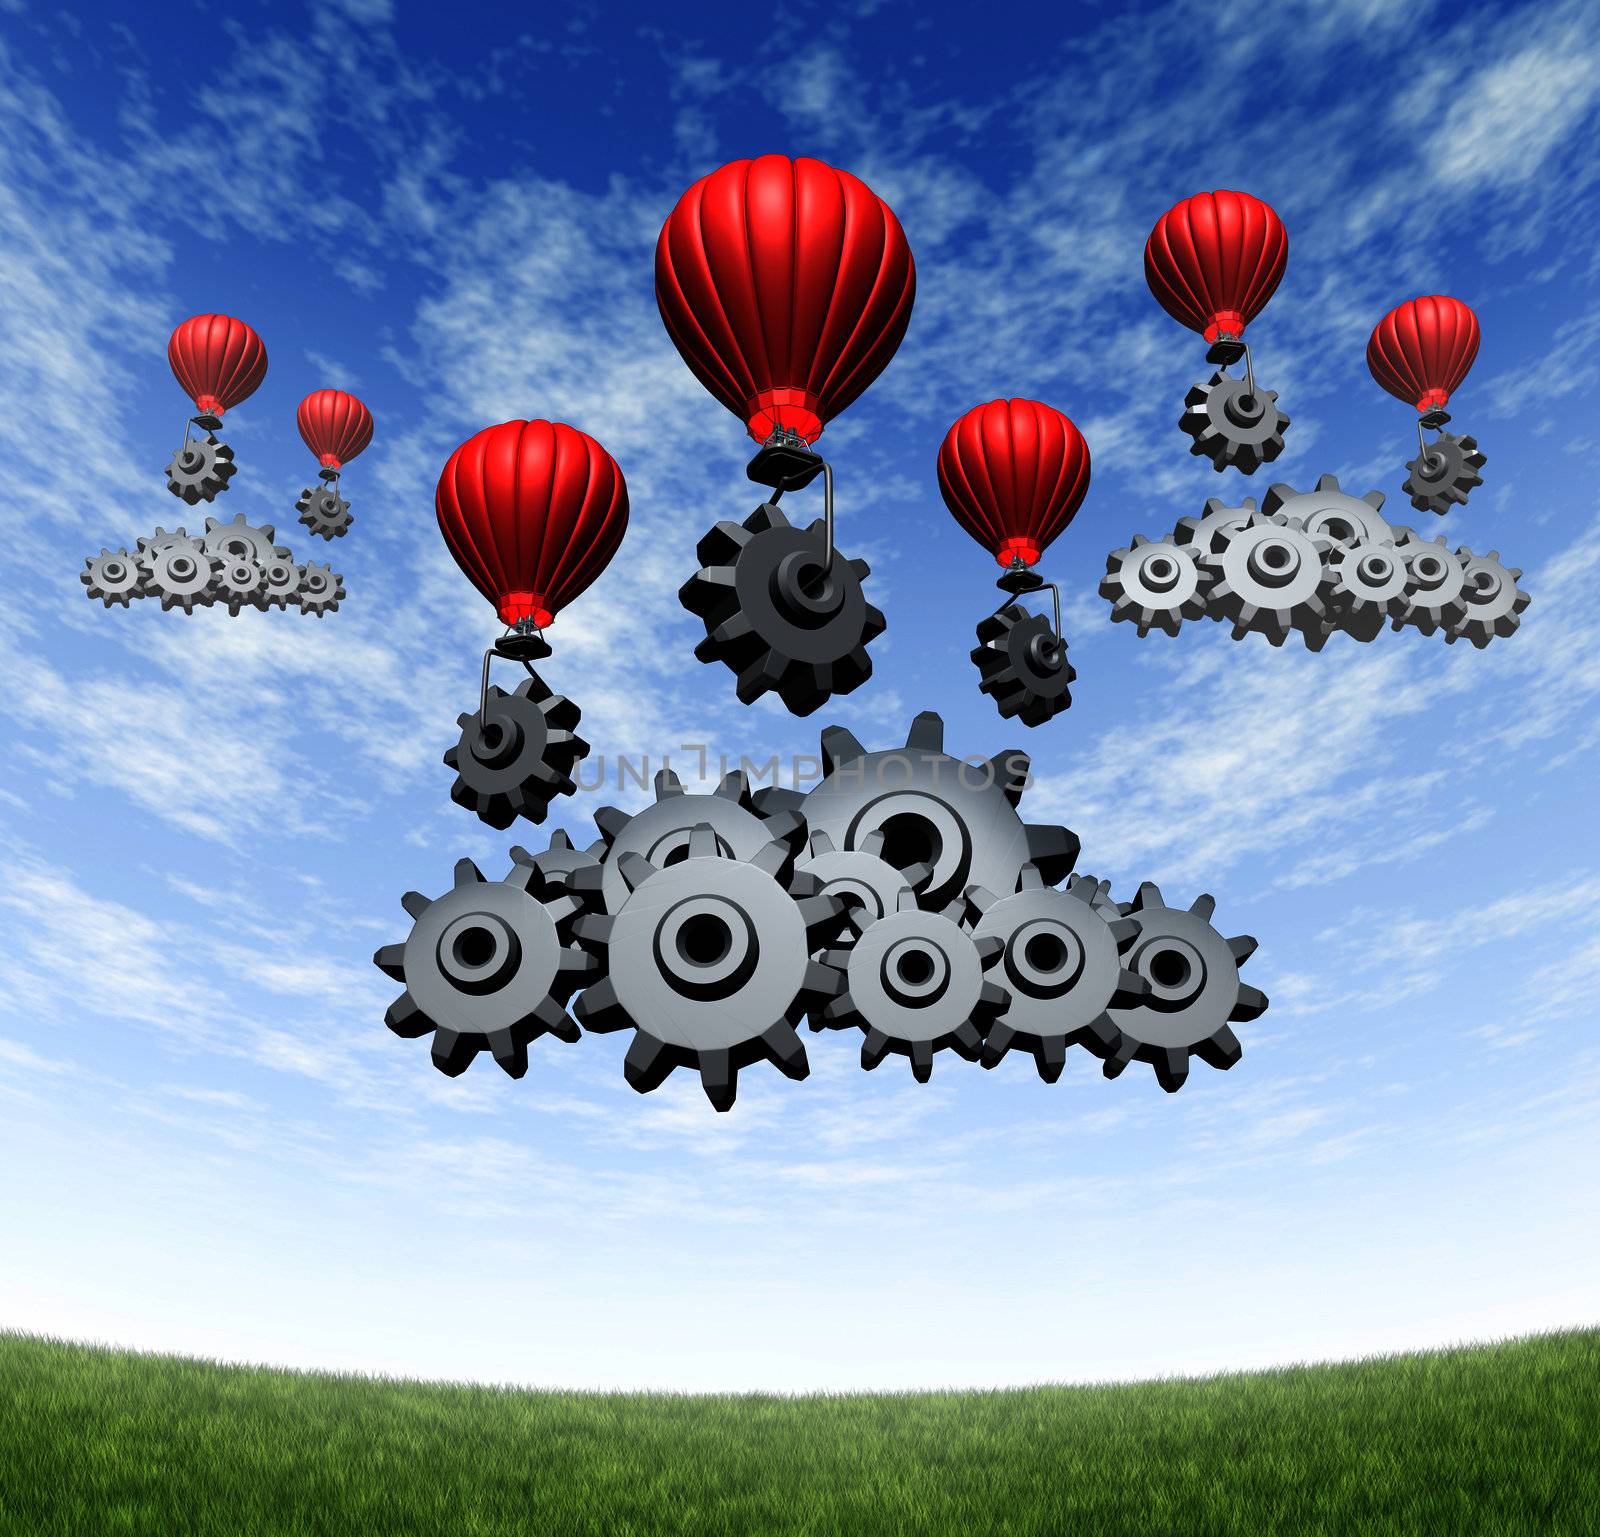 Wireless technology business concept and building an internet mobile cloud computing network with red hot air balloons with gears and cogs creating data server clouds on a blue summer sky and green grass.